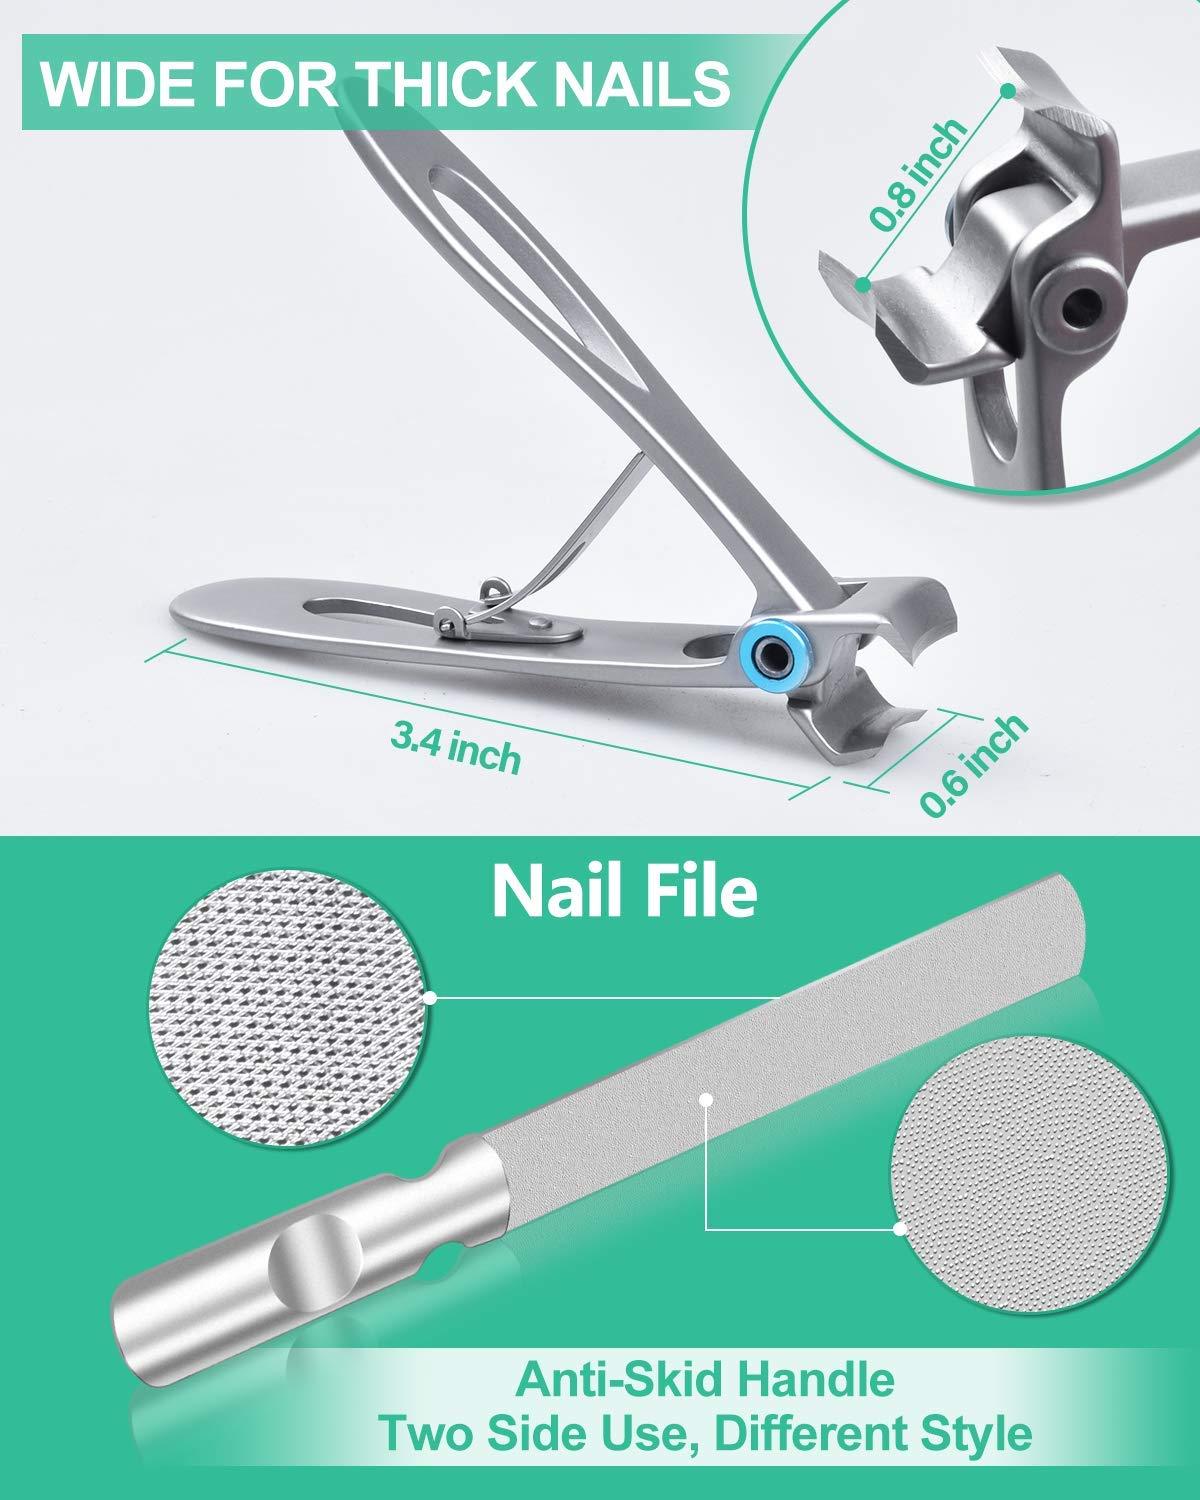 Toenail Clippers for Thick Nails, Nail Clippers for Thick & Ingrown Toe  Nails with file, Professional Podiatrist Sharp Curved Blades Fingernail  Cutter